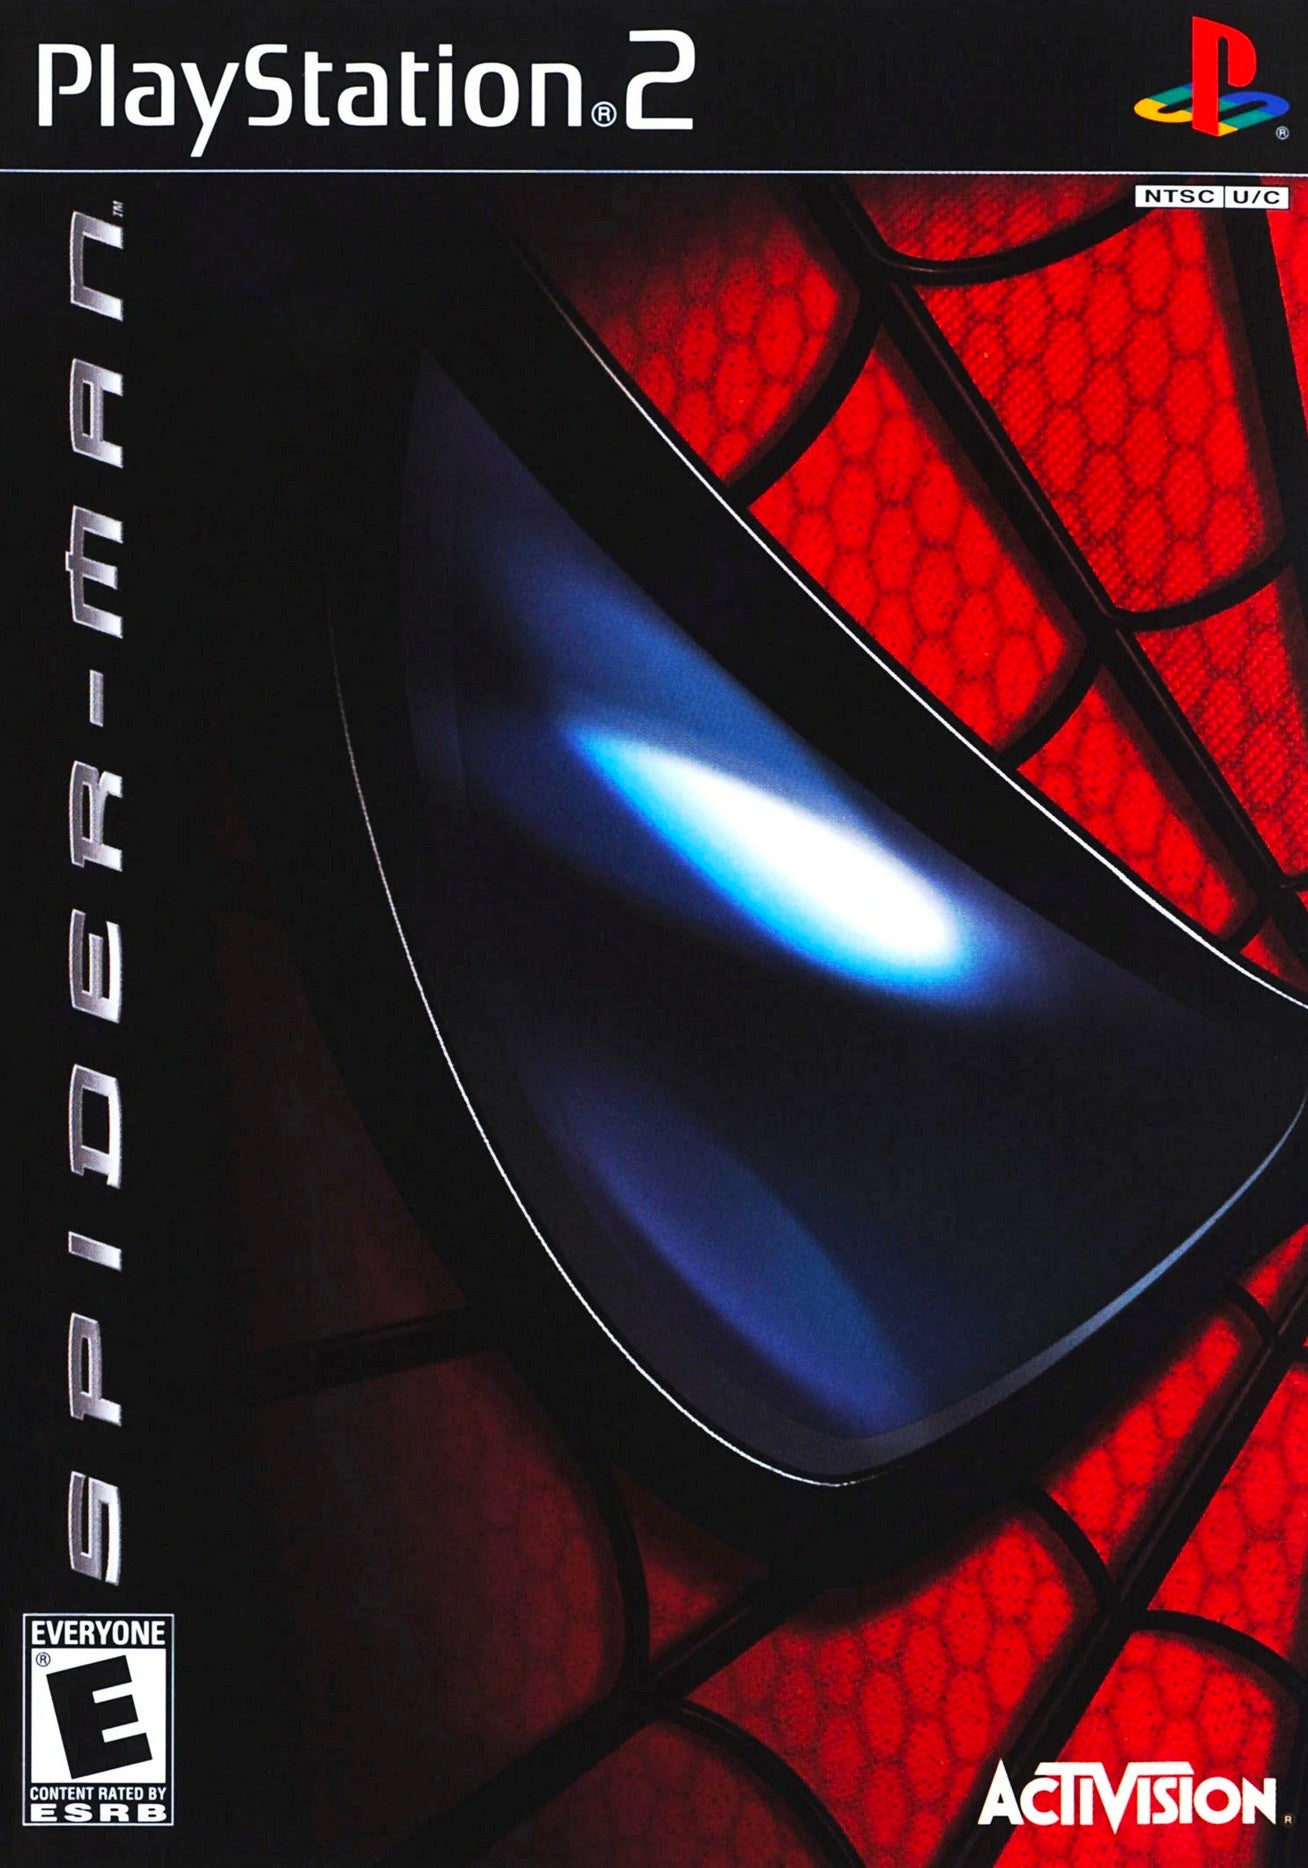 Spiderman (Greatest Hits) - Darkside Records